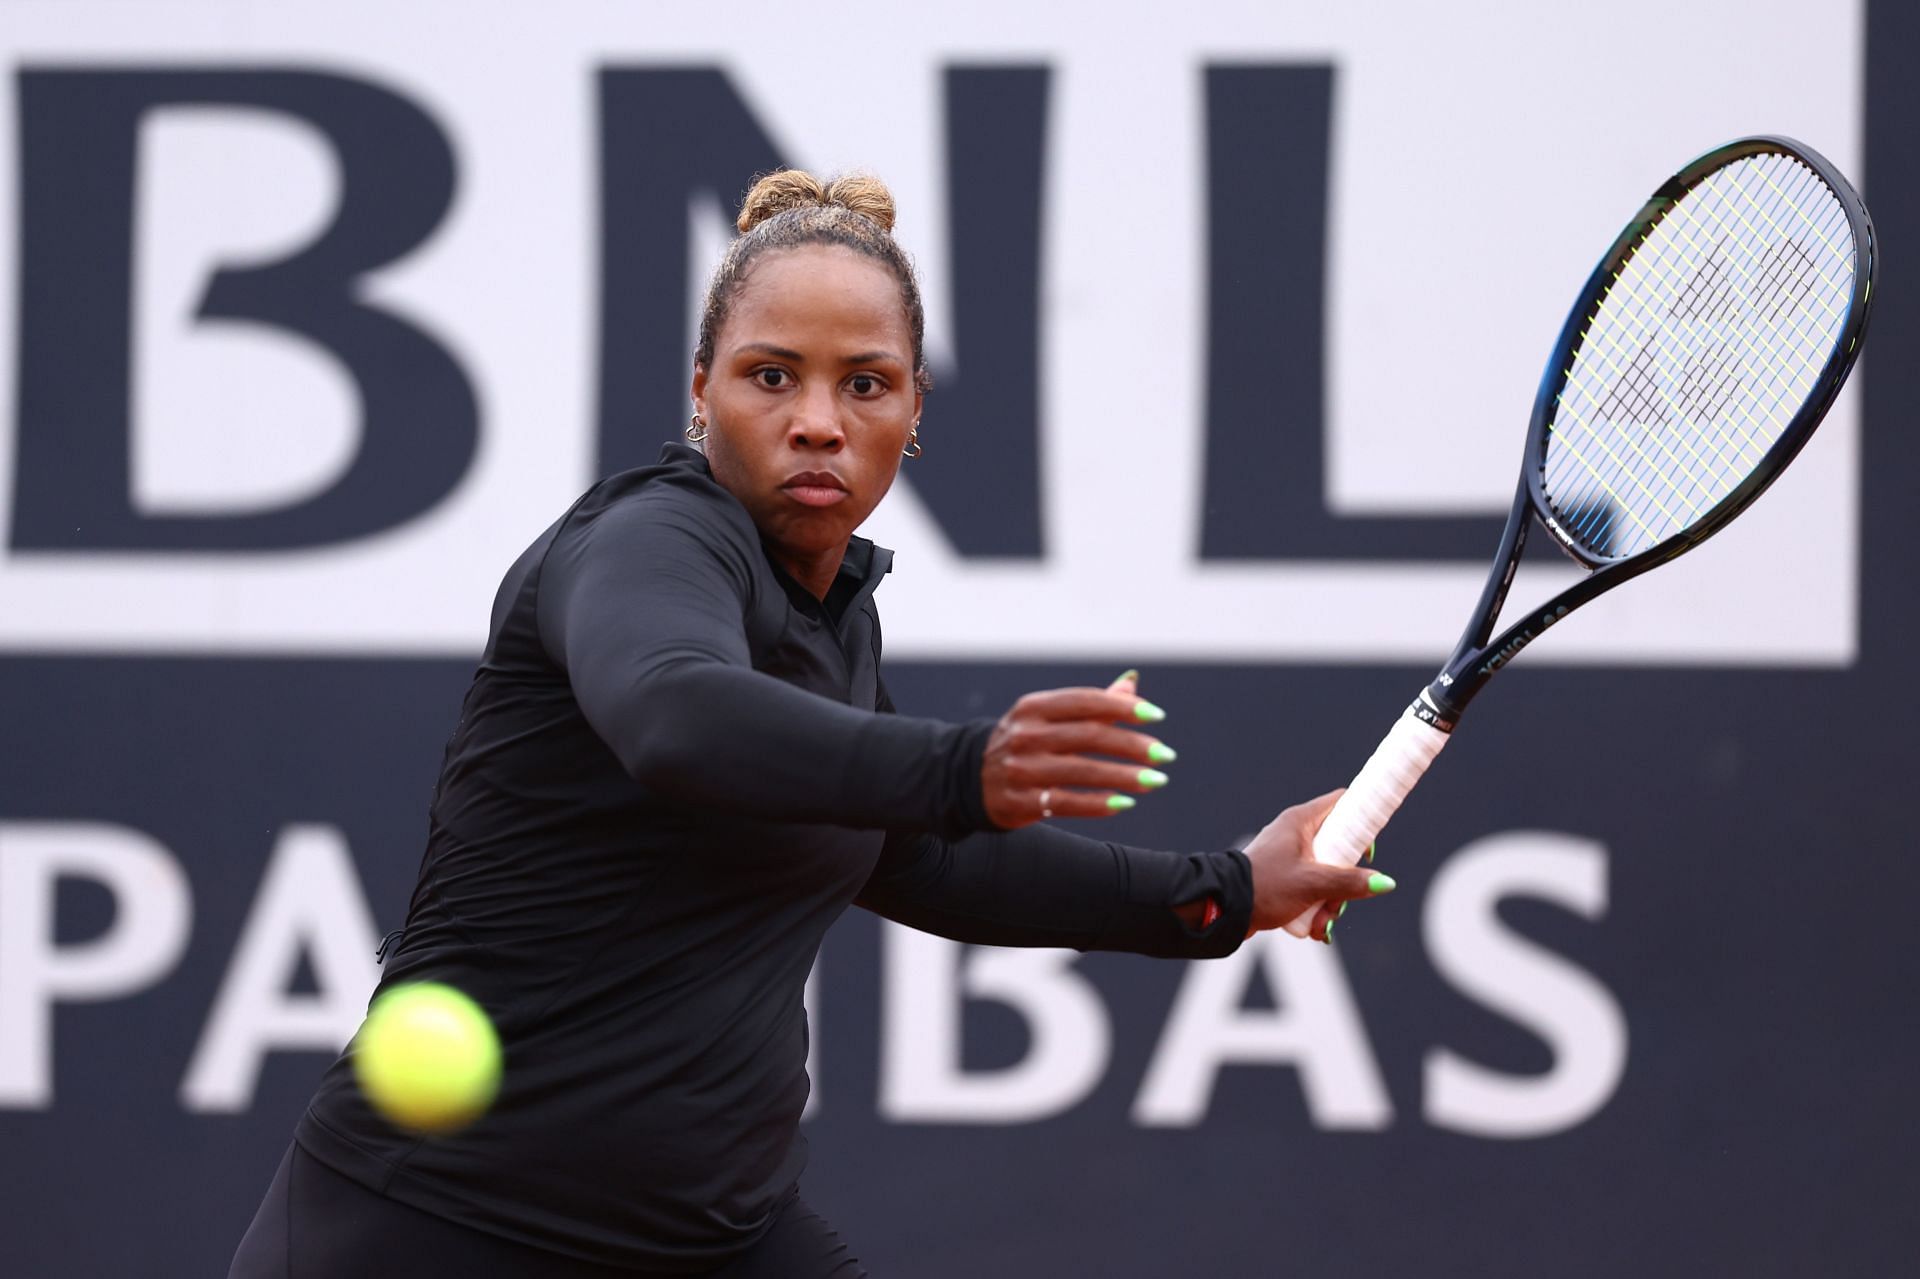 Taylor Townsend at the Italian Open